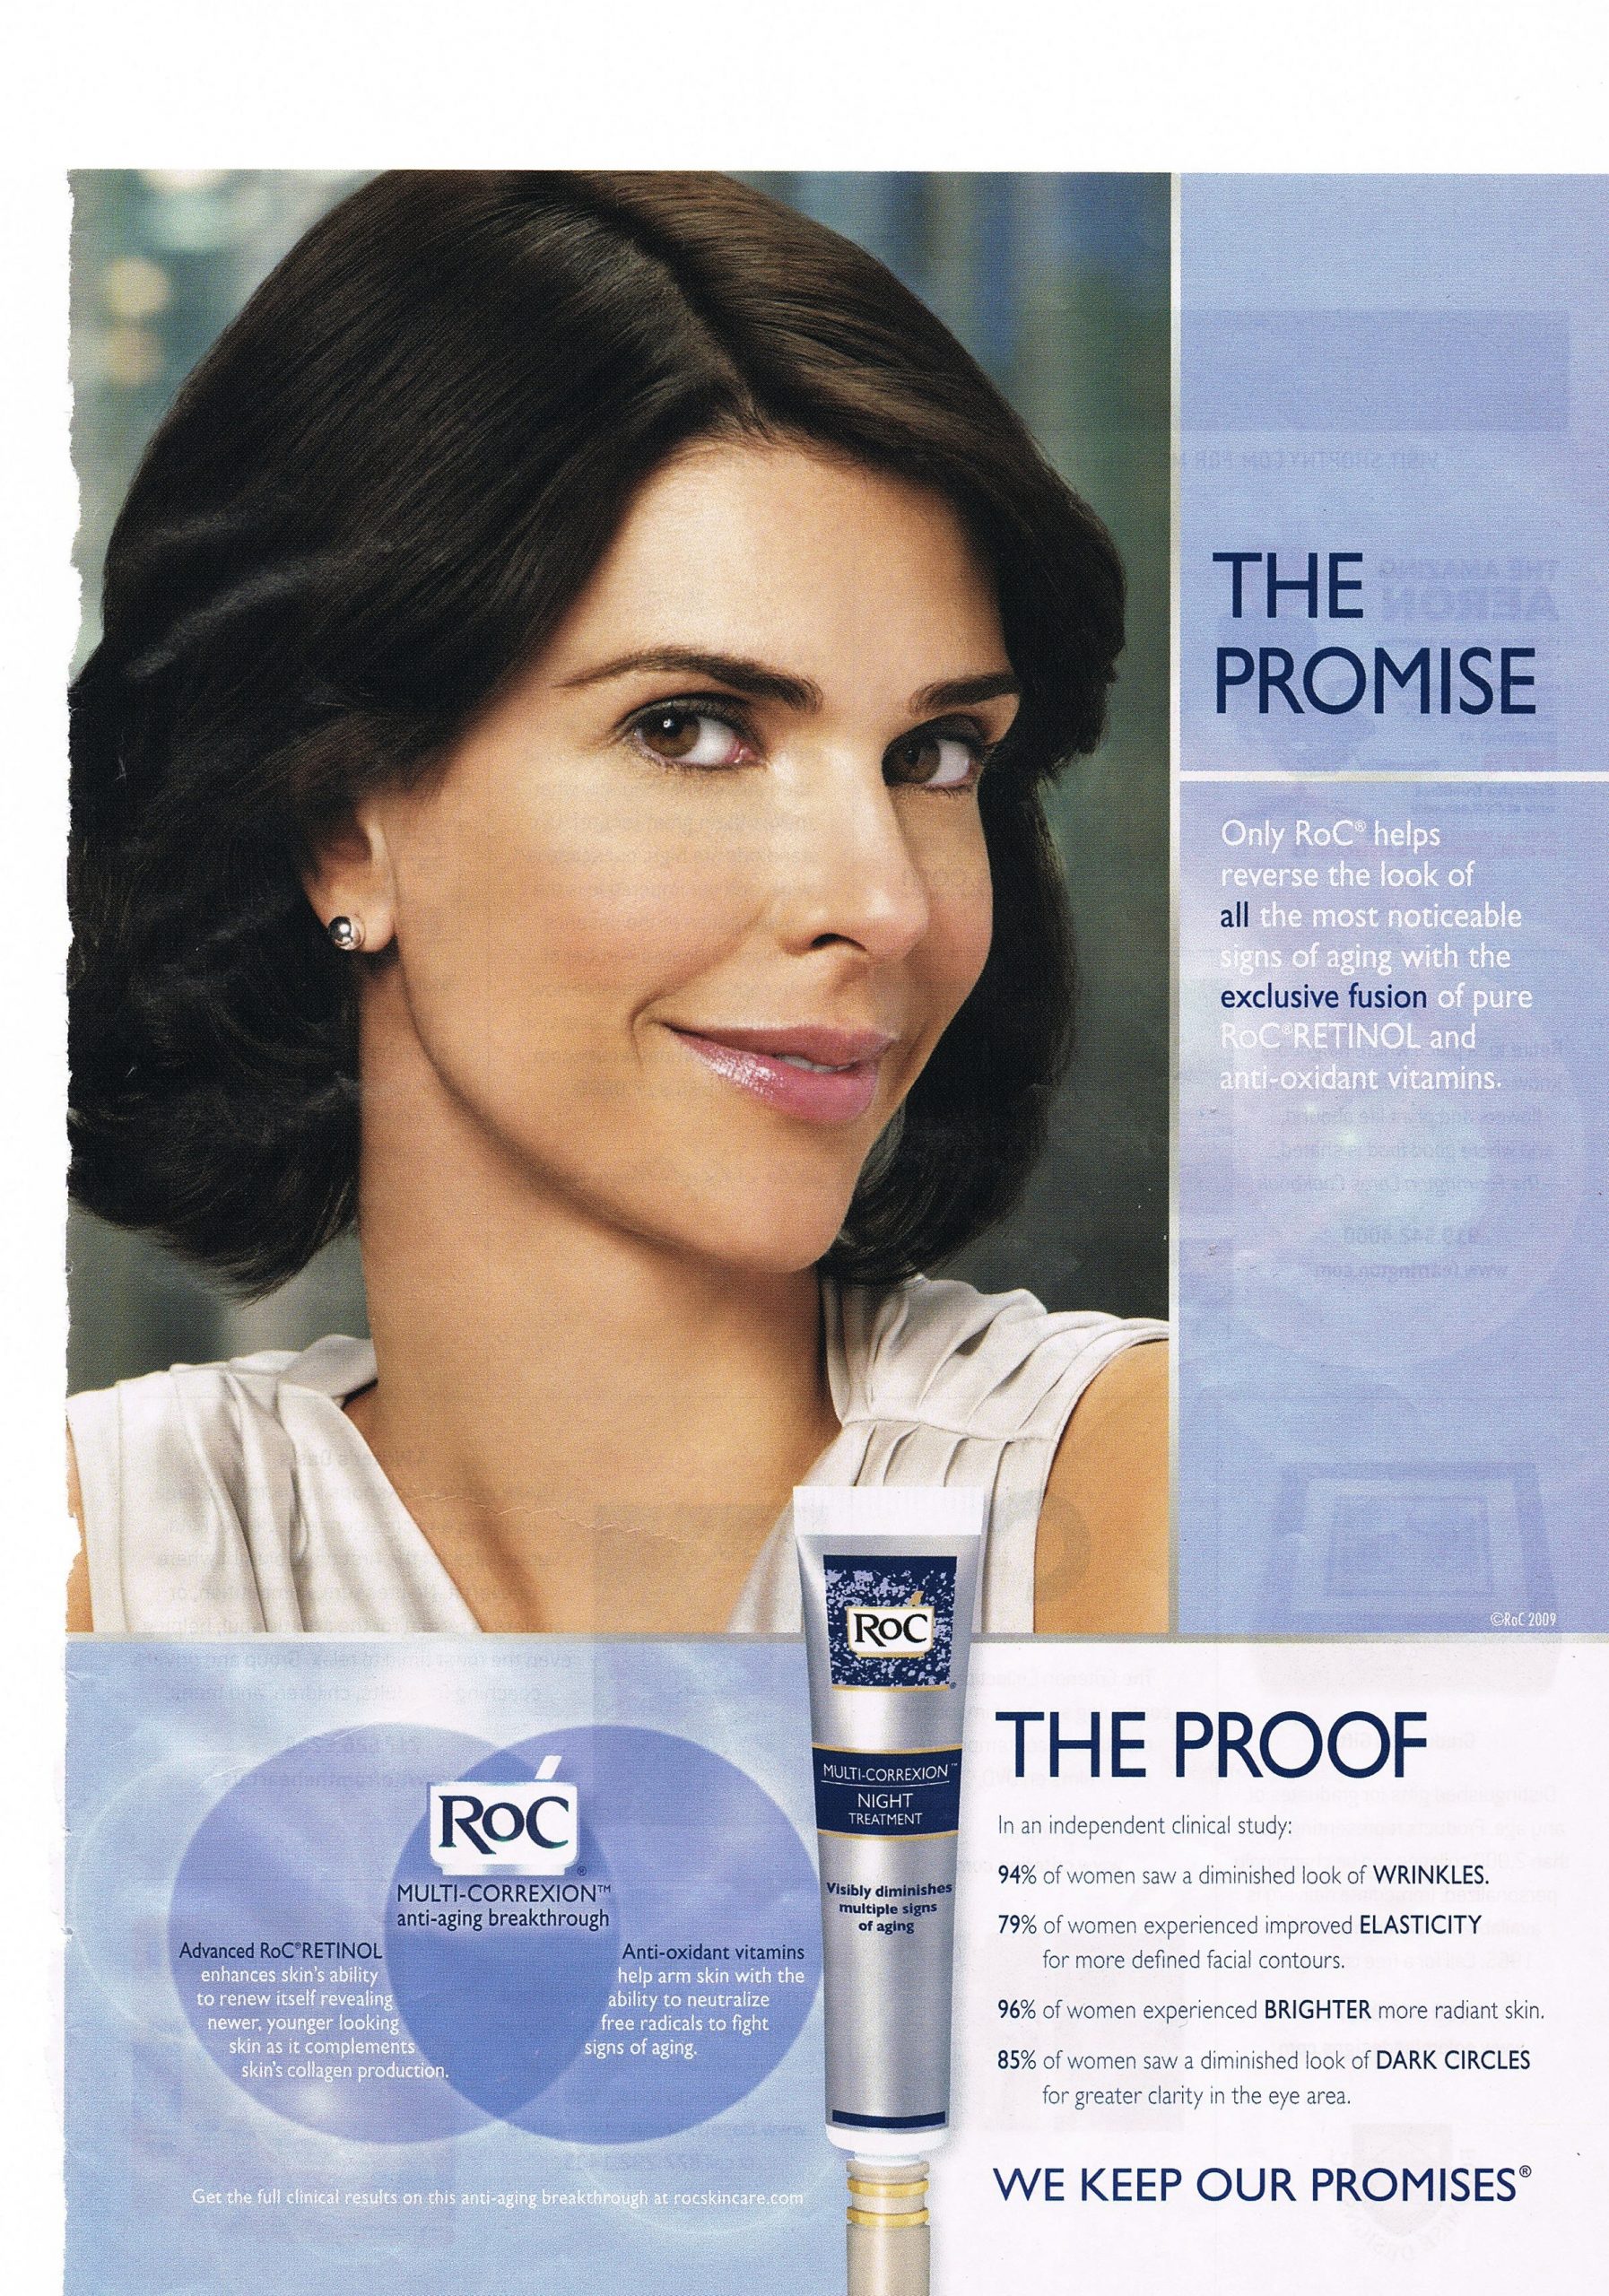 Roc Skincare Products Advantages and Drawbacks